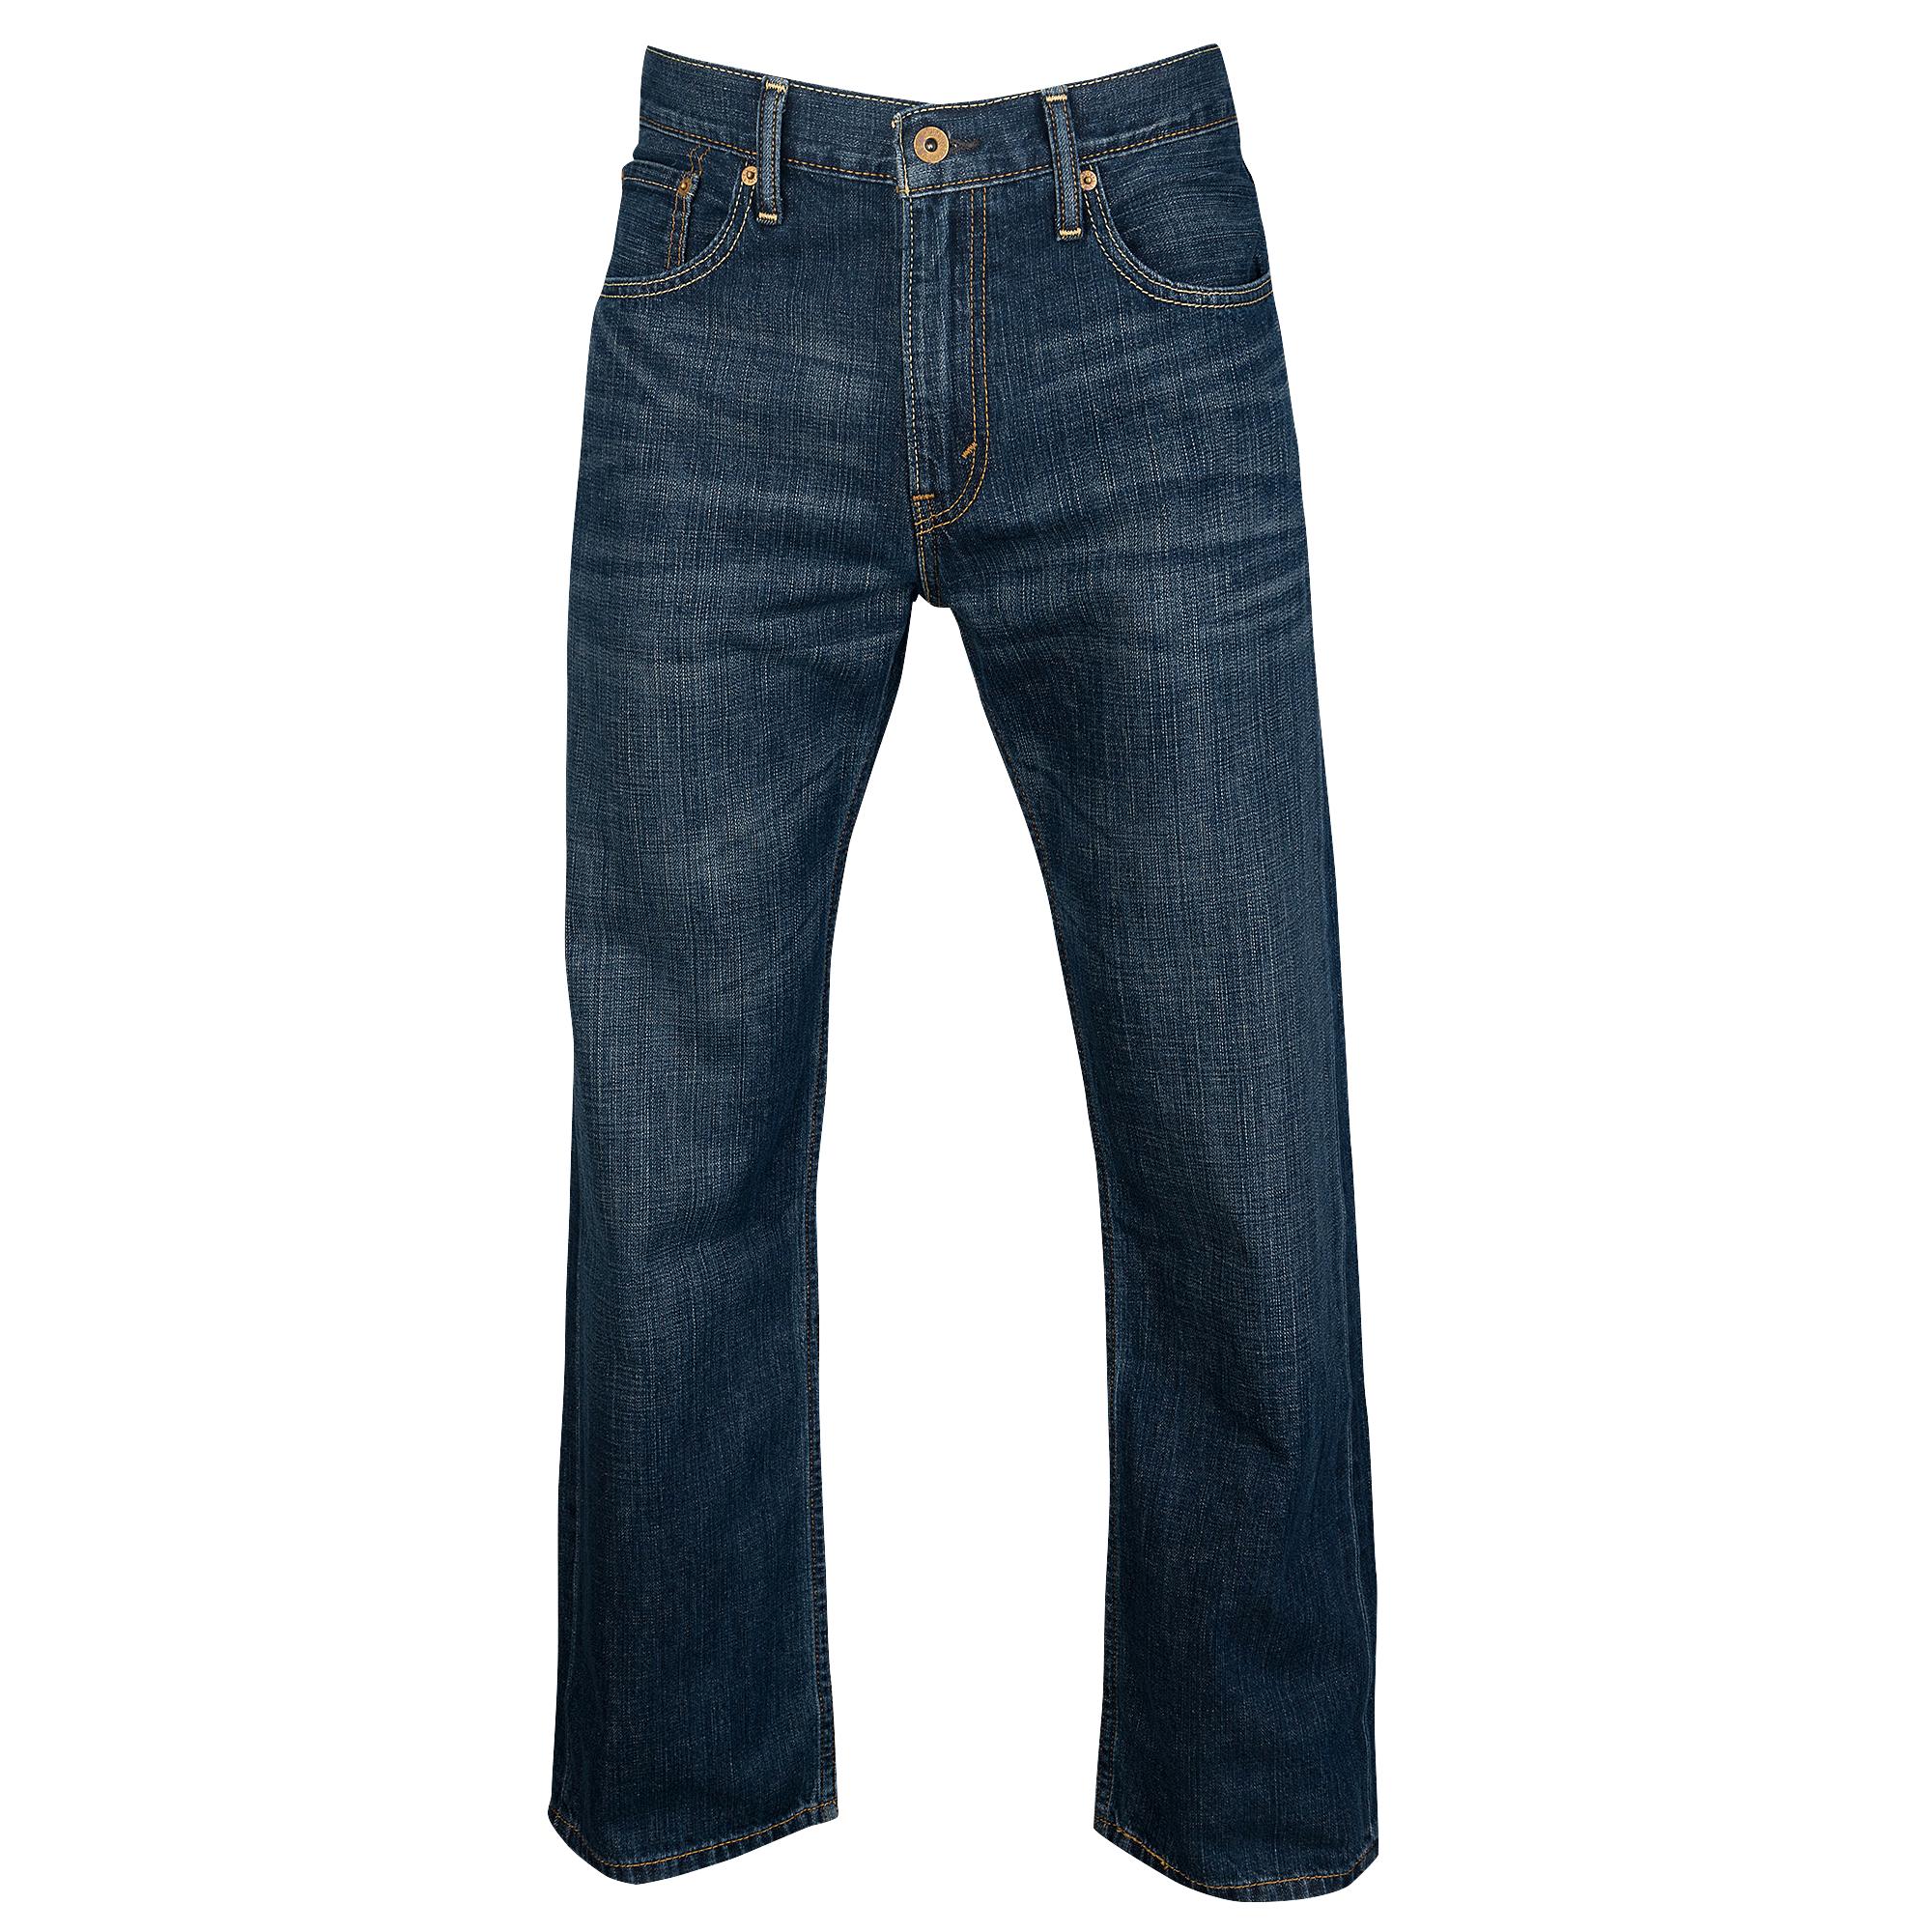 Levi's Denim 569 Loose Straight Jeans in Blue for Men - Save 19% - Lyst